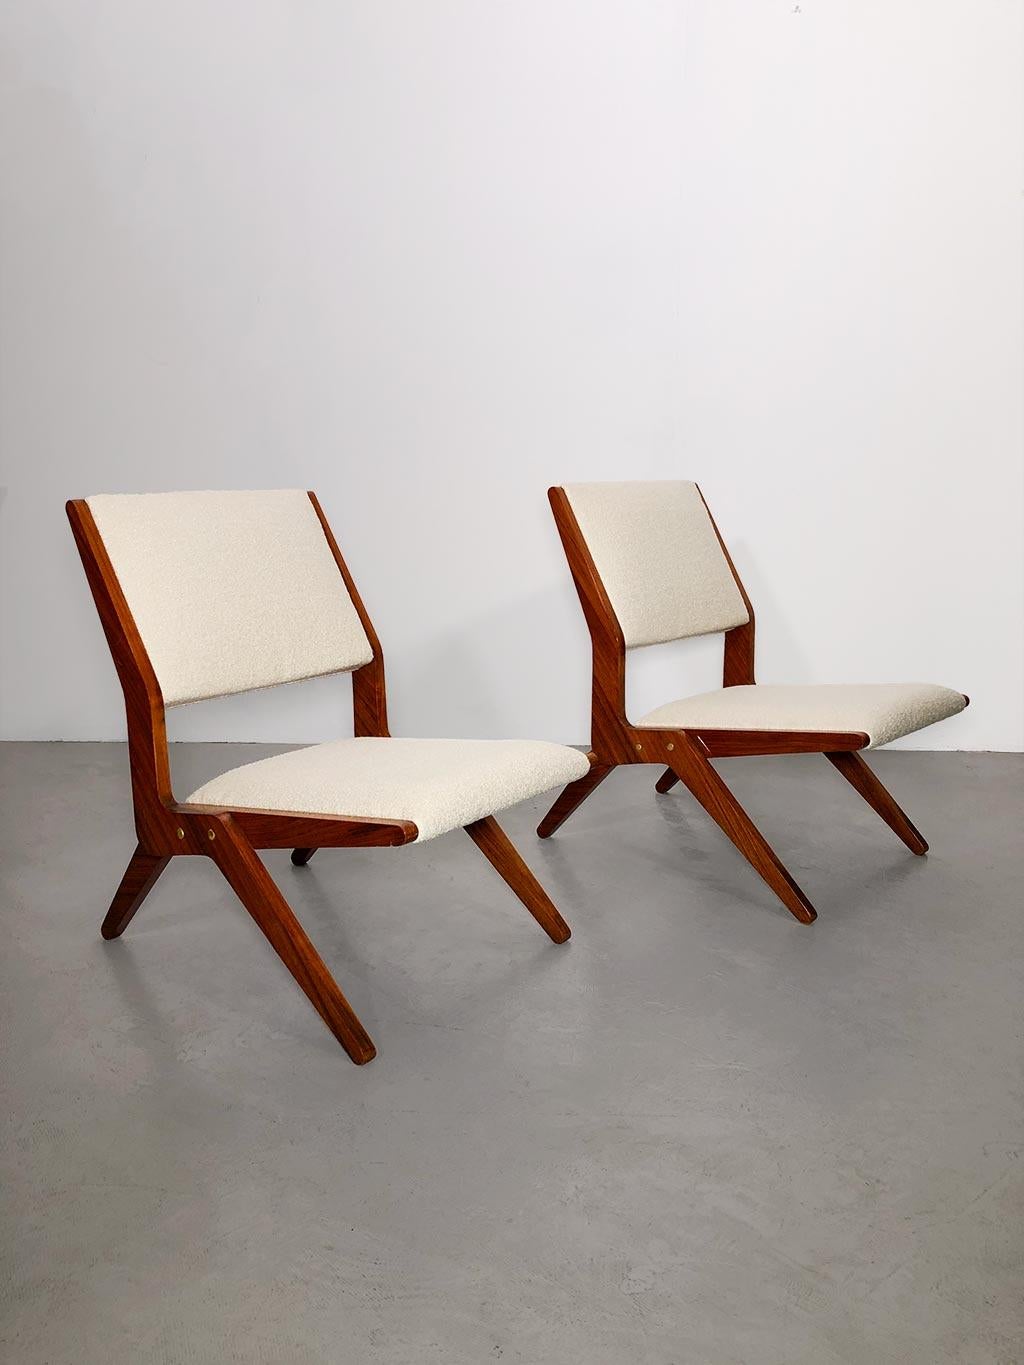 Beautiful pair of mid-century armchairs attributed to Augusto Romano. Polished lacquered walnut scissor frame, brass details. The seat and back have been completely restored by professional upholsterers using the banded techniques of the time and